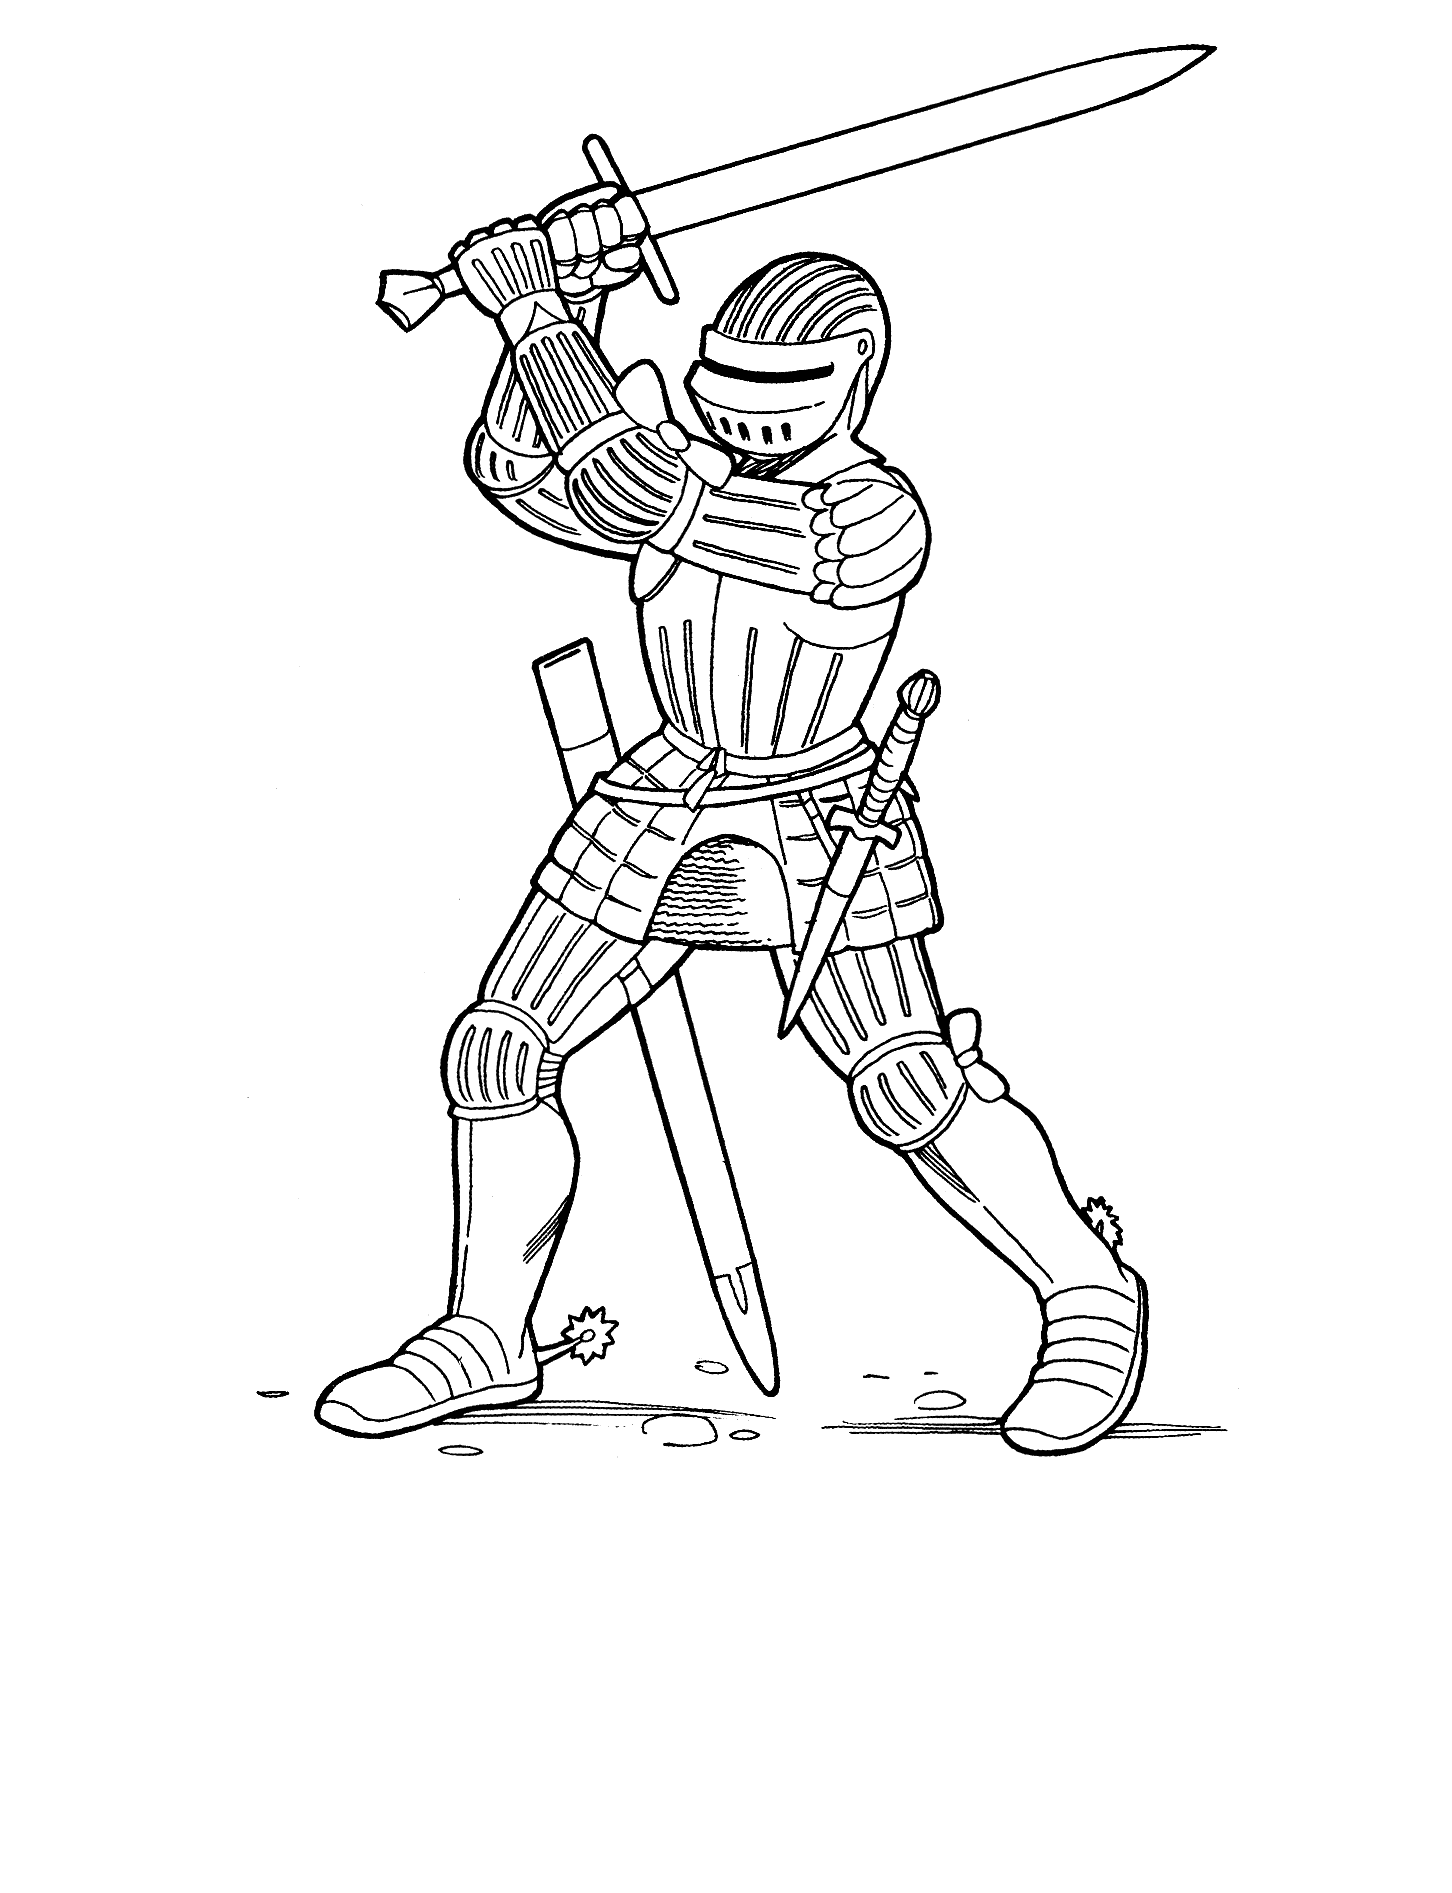 knight coloring page tutorials visual art lessons artcms coloring knight page 